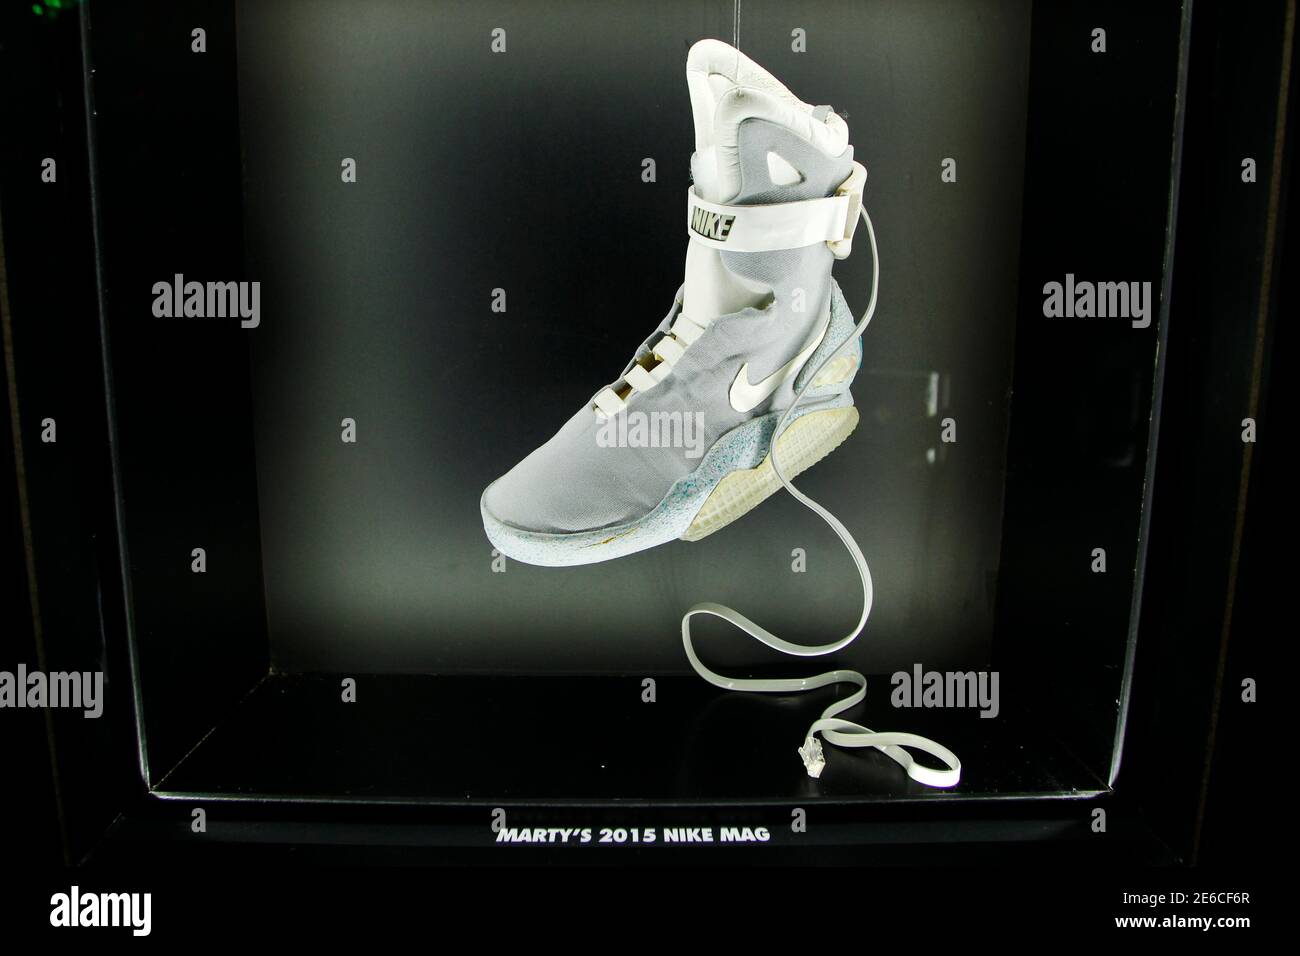 Minimizar Regeneración Lo siento A 2015 NIKE MAG shoe prop worn by the "Back to the Future" character Marty  McFly, played by Michael J. Fox, is displayed during the unveiling of the  2011 NIKE MAG shoes